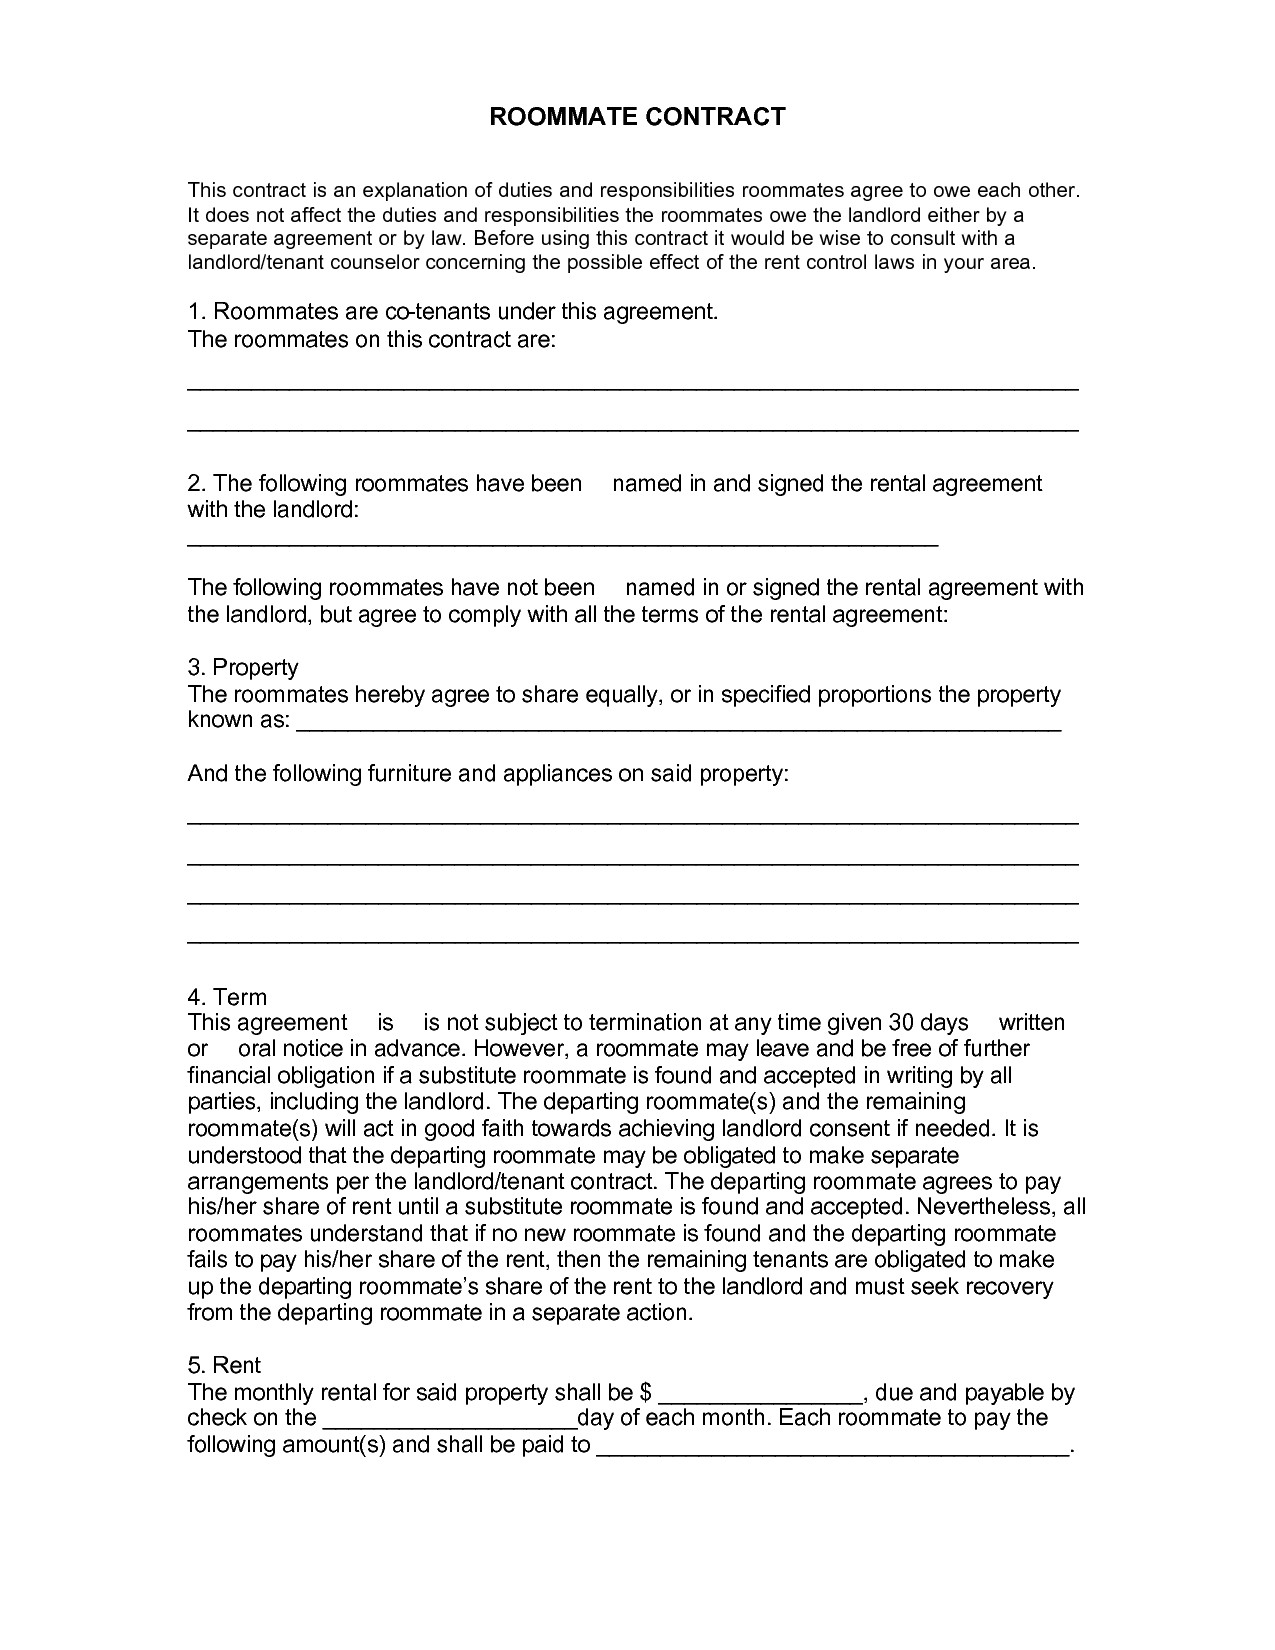 College Roommate Contract Template Pin by Crystal Mears Williams On forever Mine